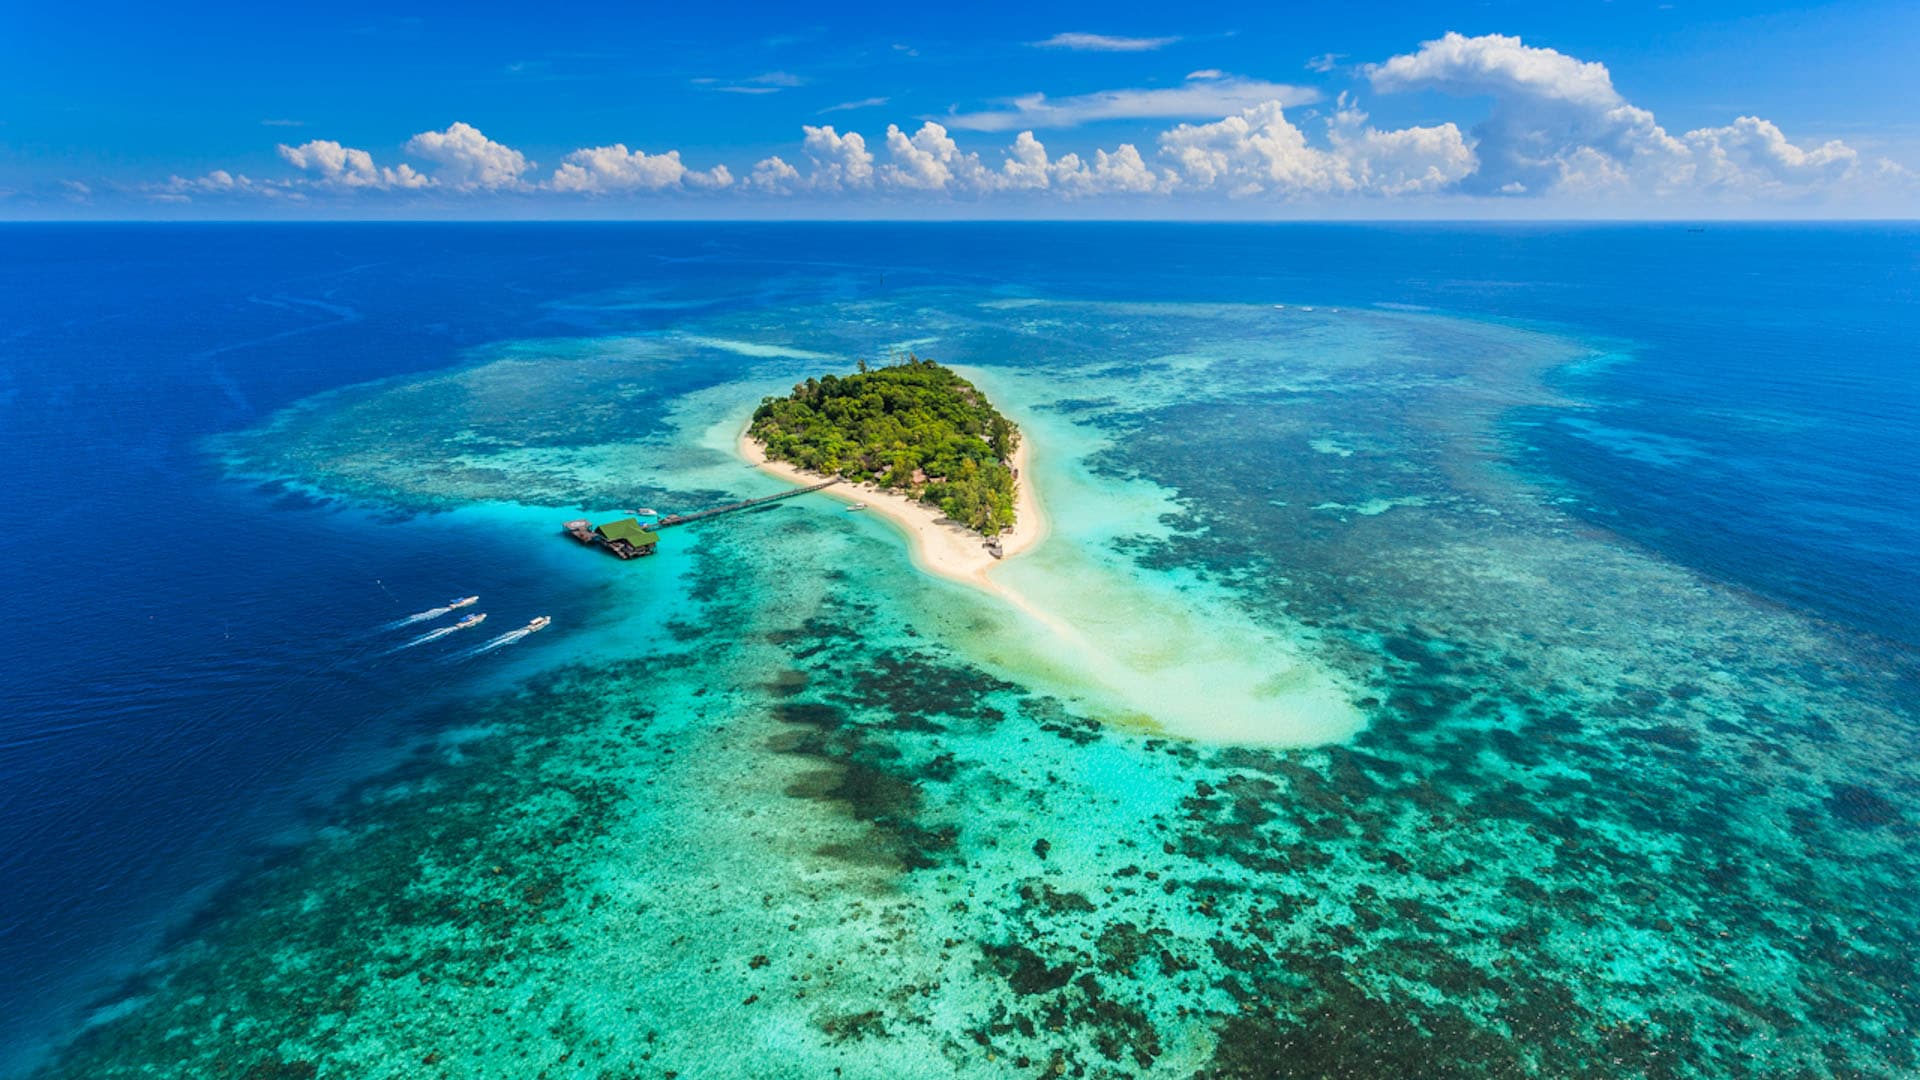 7 best diving spots in Malaysia for unforgettable underwater experiences